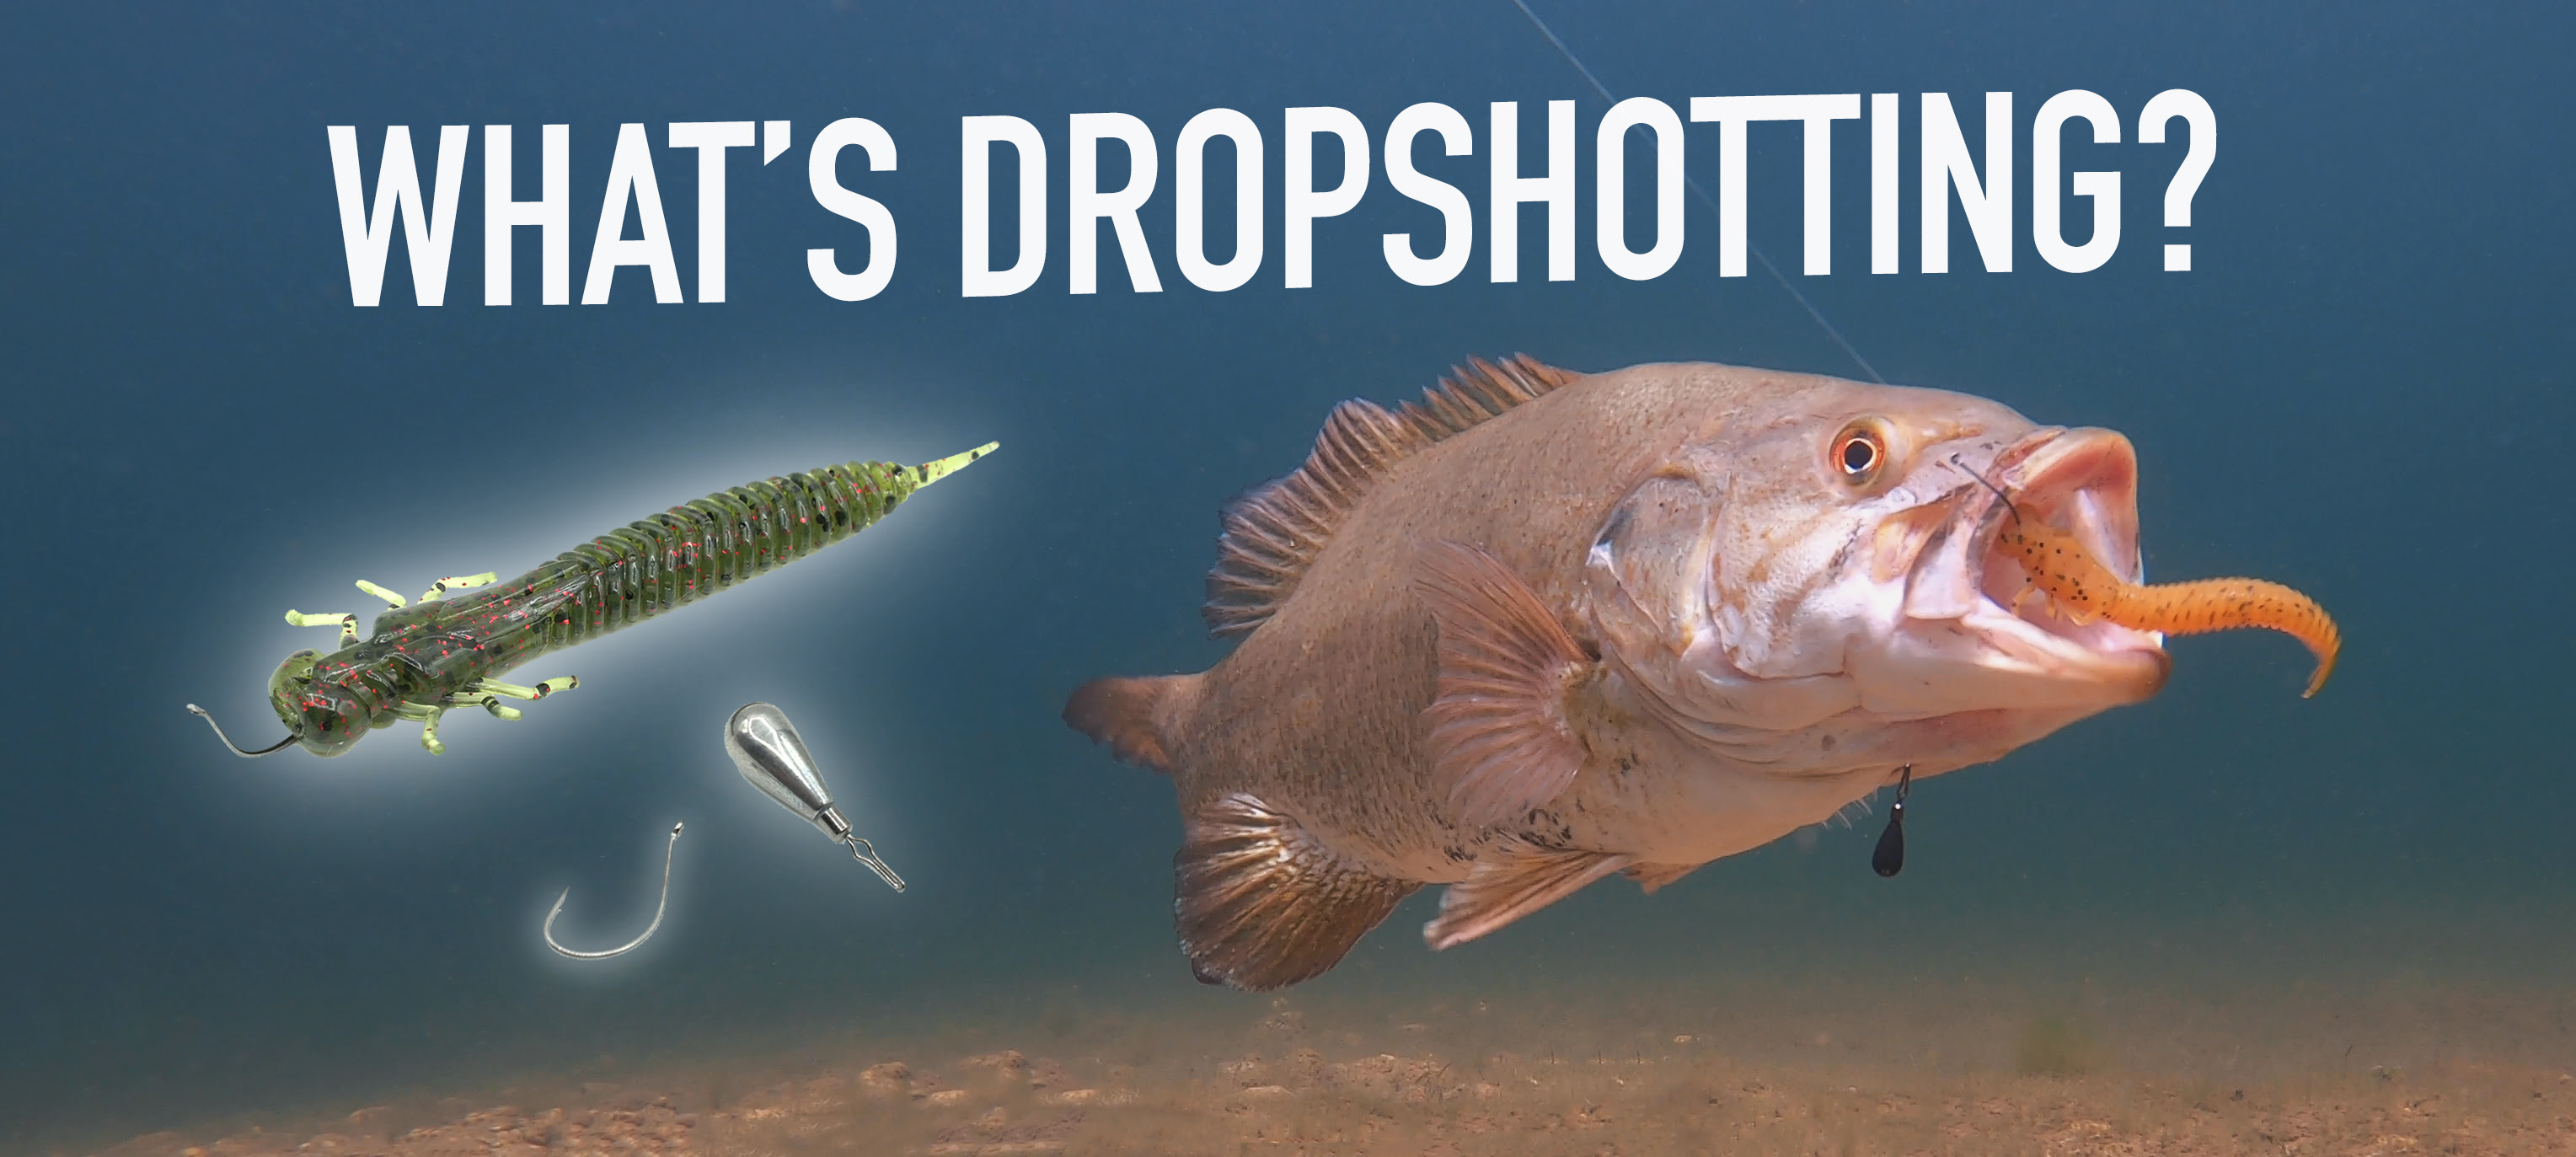 LEARN HOW TO DROPSHOT! (CATCH MORE FISH) by Fresh Baitz